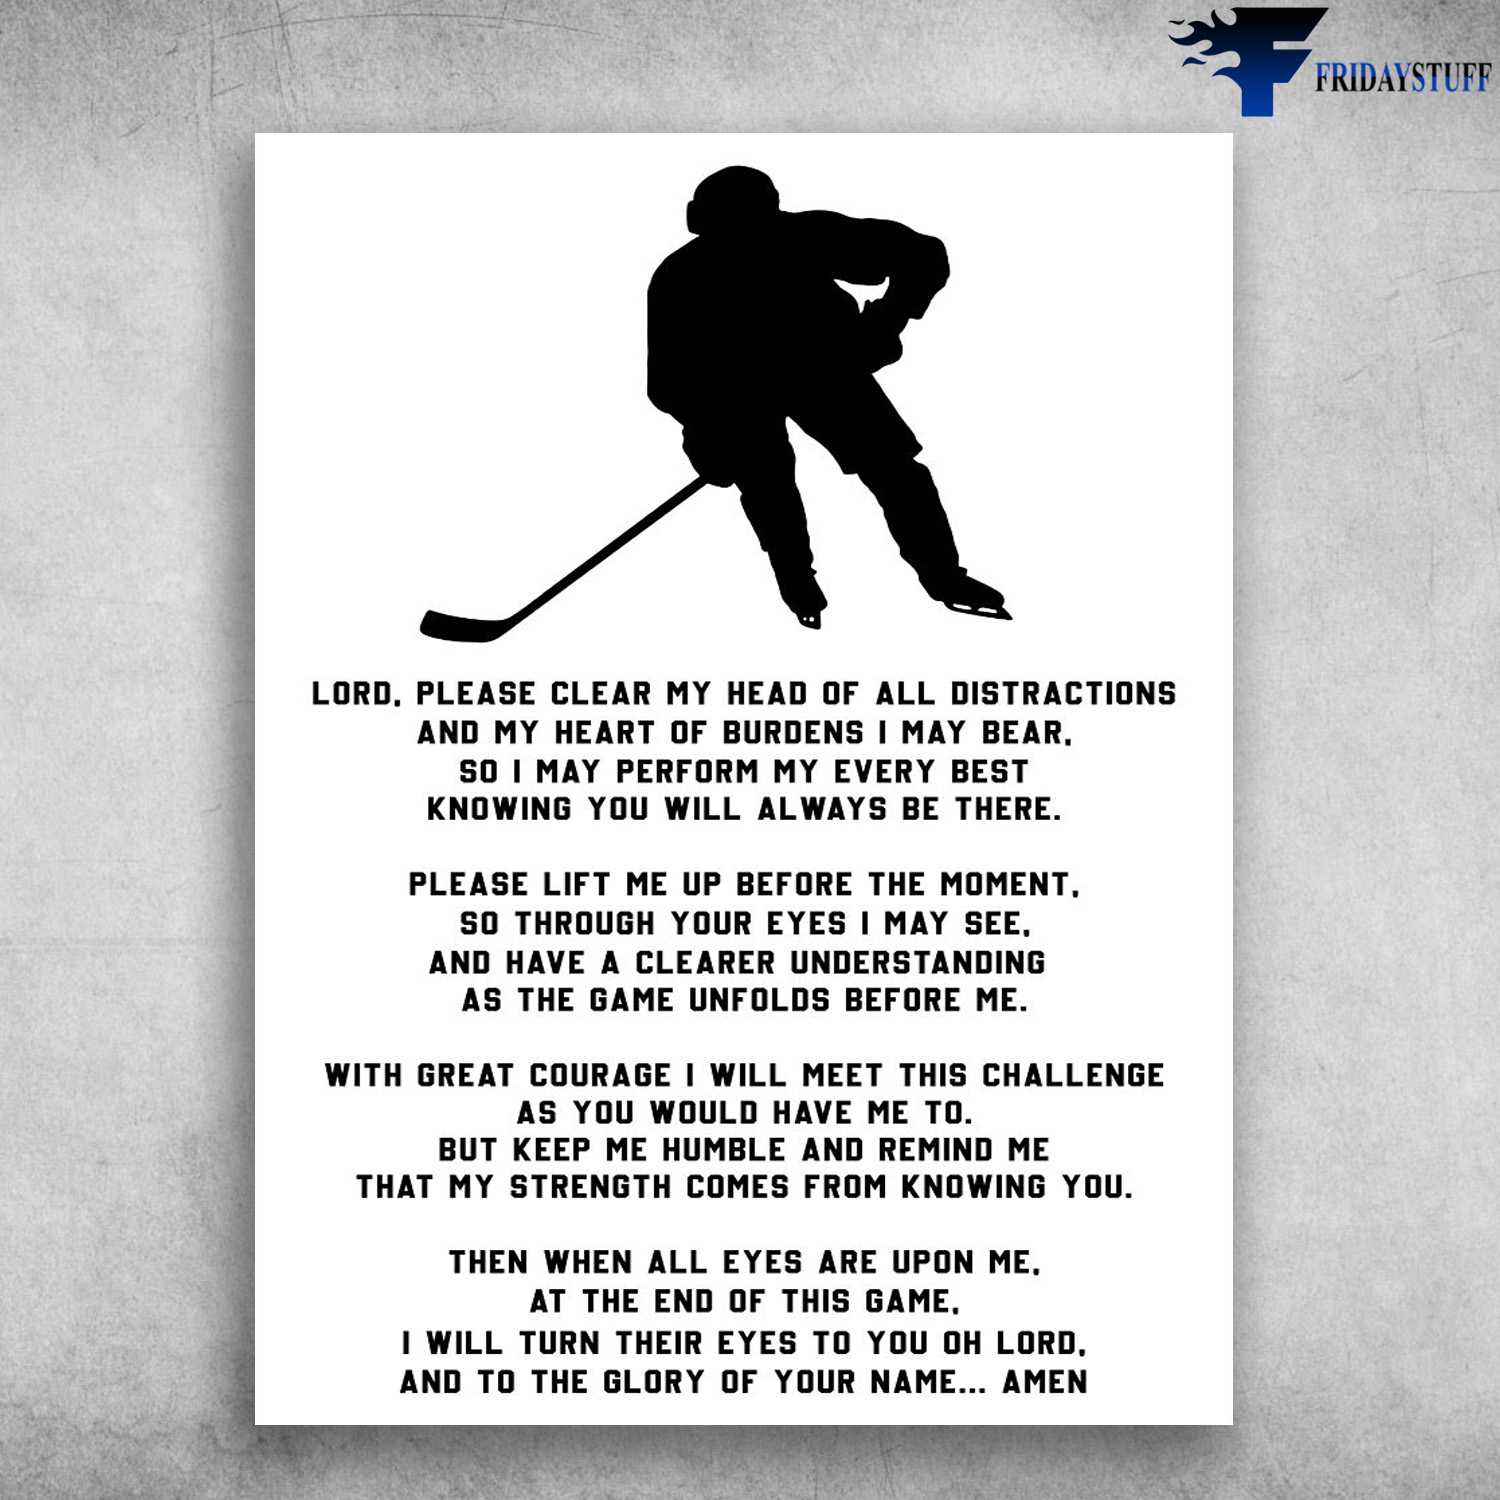 Hockey Poster, Hockey Player - Lord, Please Clear My Head Of All Distractions, And My Heart Of Burdens I May Bear, So I May Perform My Every Best, Knowing You Will Always Be There